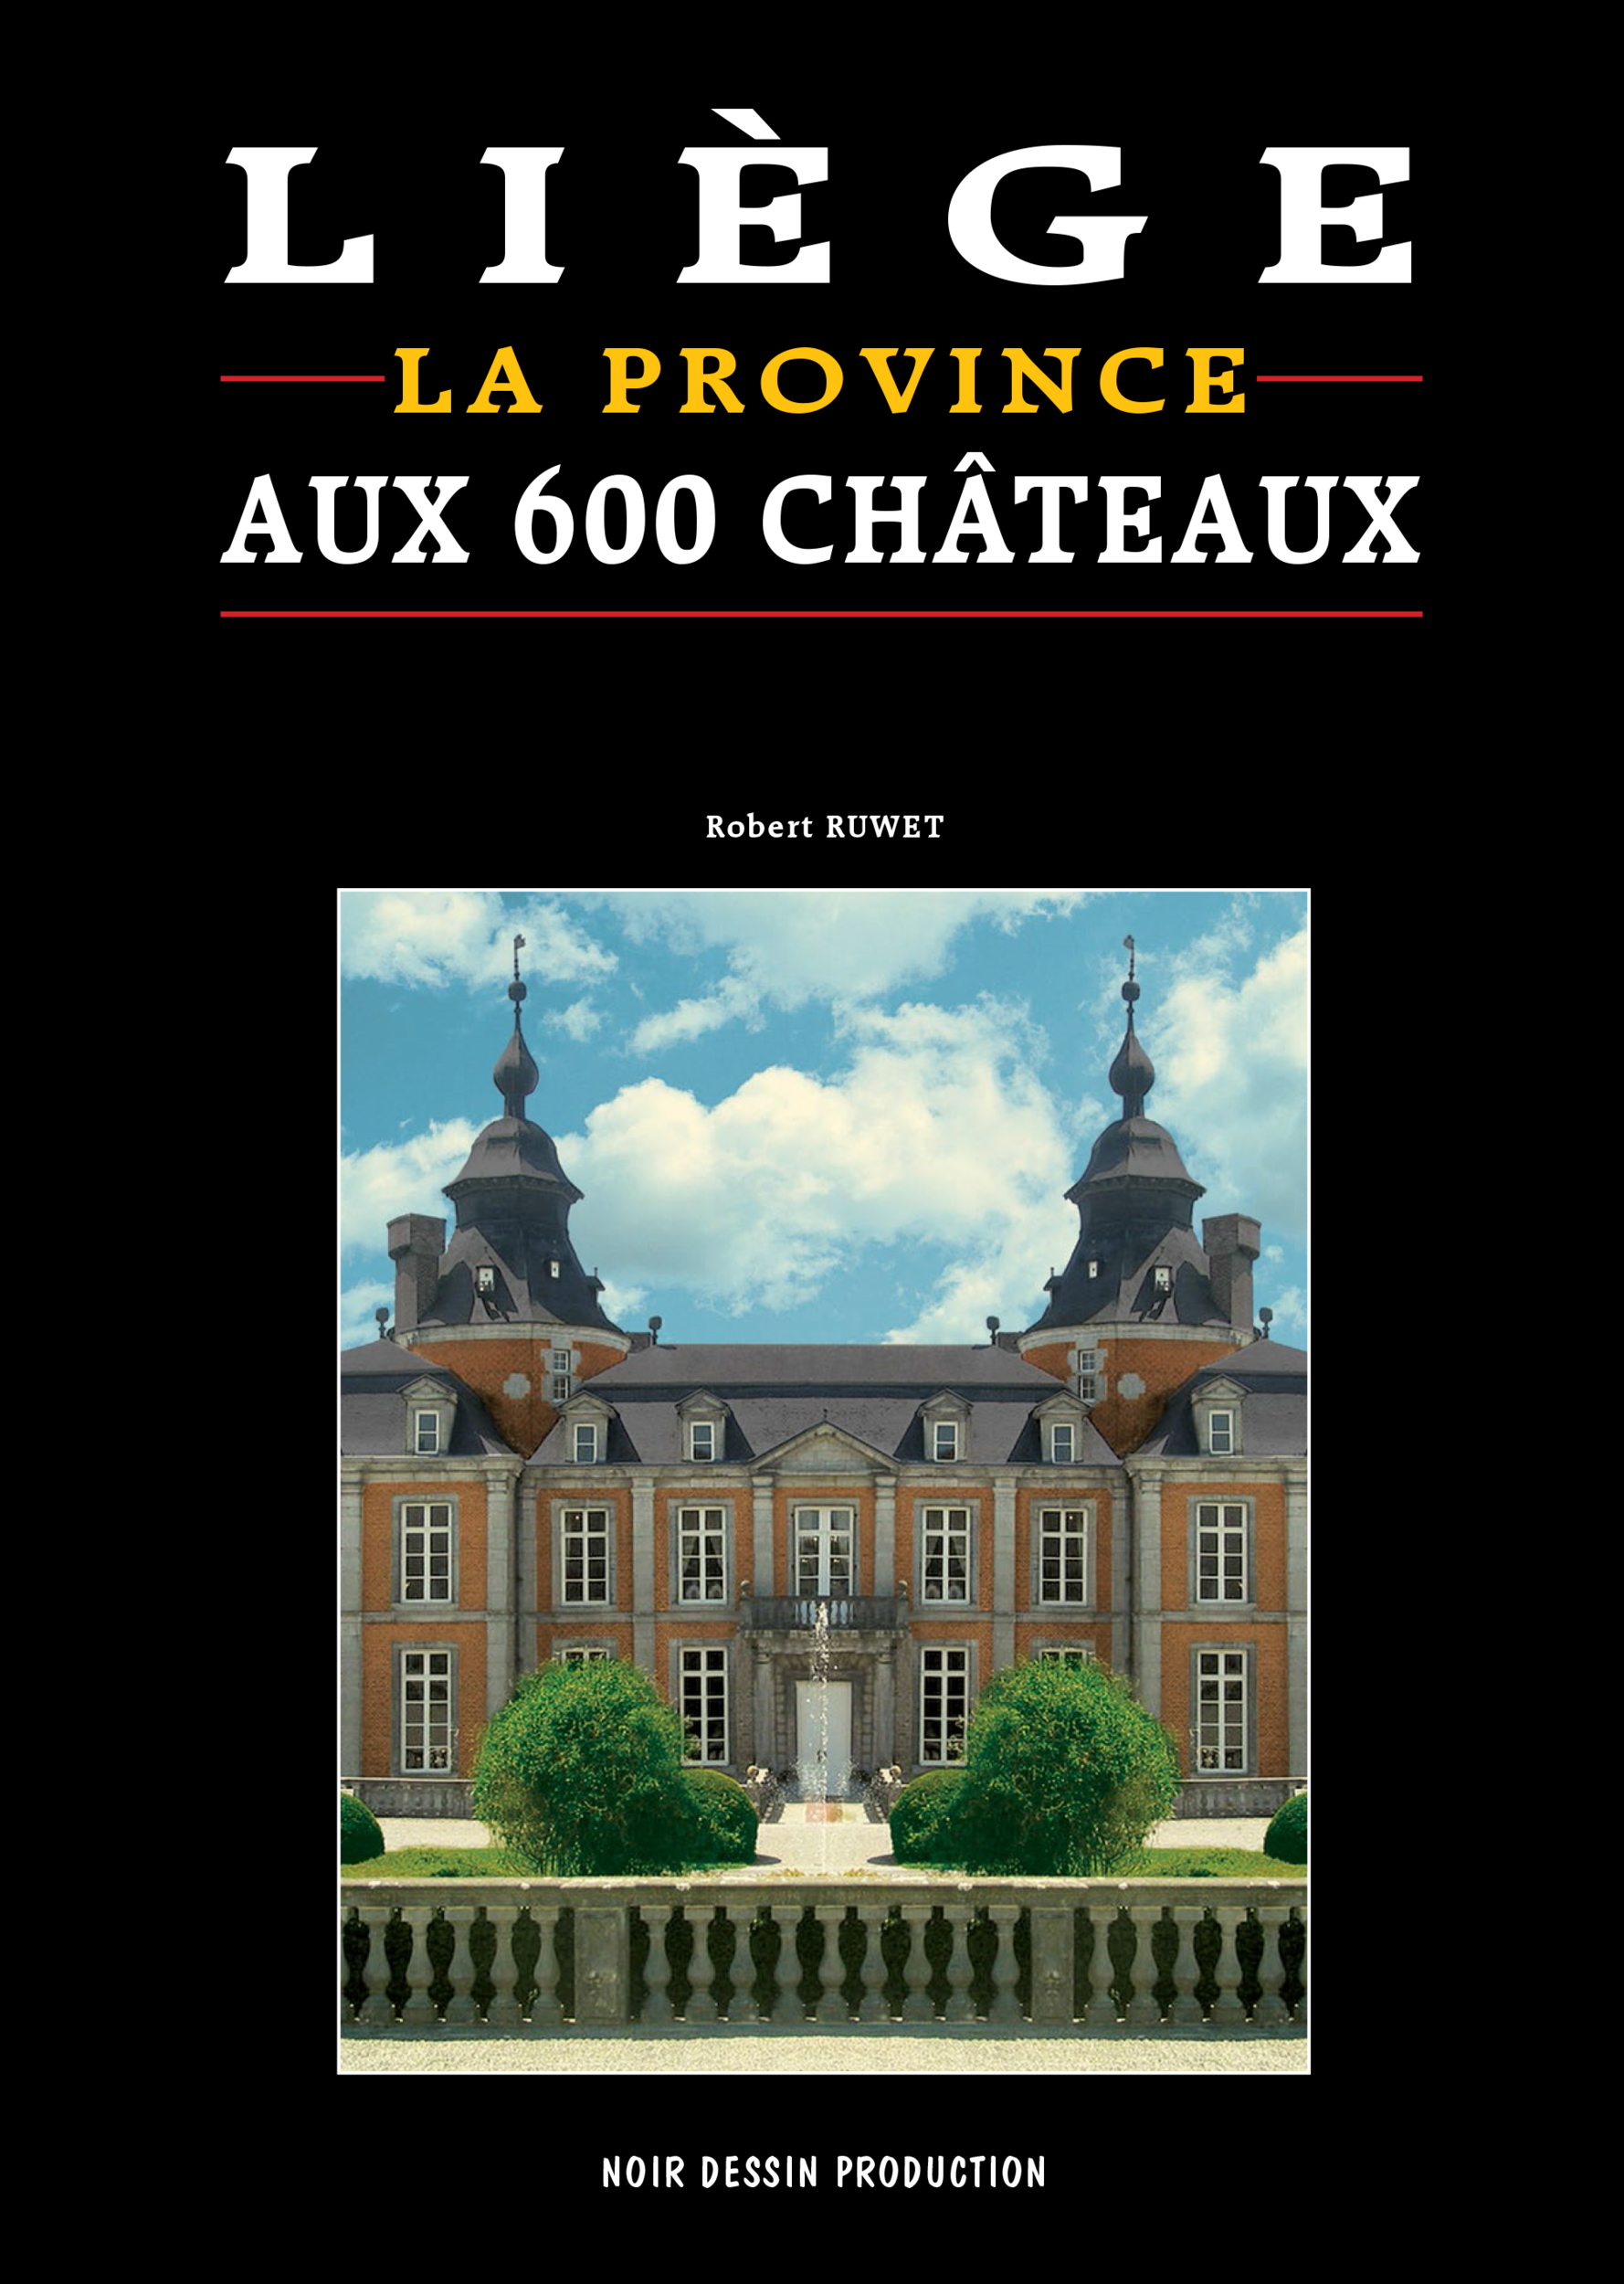 cover-600 chateaux-projet-2